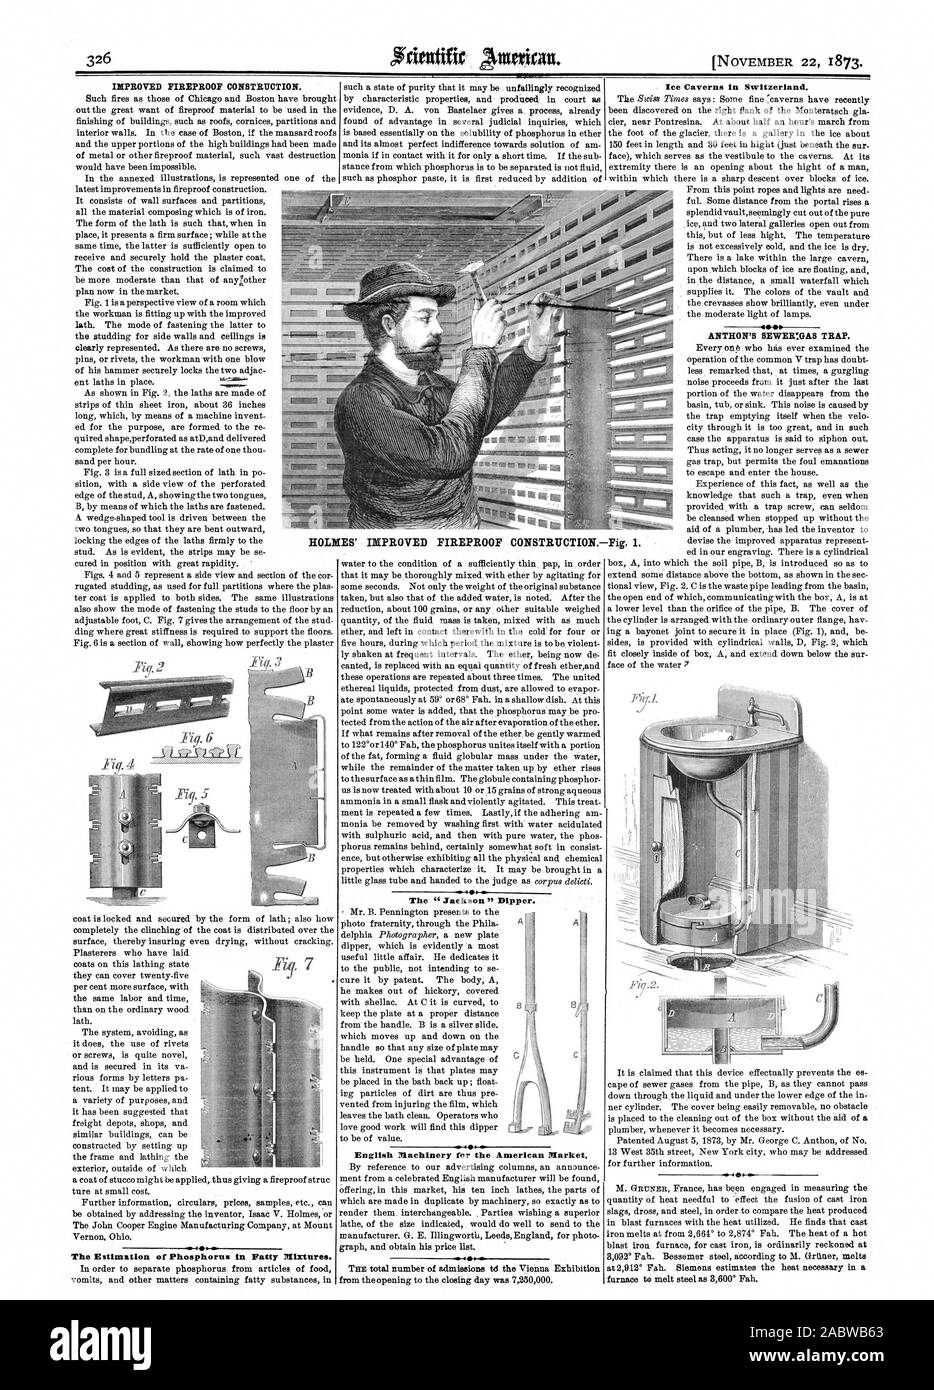 326 NOVEMBER 22 1873. IMPROVED FIREPROOF CONSTRUCTION. The Estimation of Phosphorus in Fatty Mixtures. English Machinery for the American Market. Ice Caverns in Switzerland. 41 ANTHON'S SEWER:GAS TRAP. HOLMES' IMPROVED, scientific american, 1873-11-22 Stock Photo